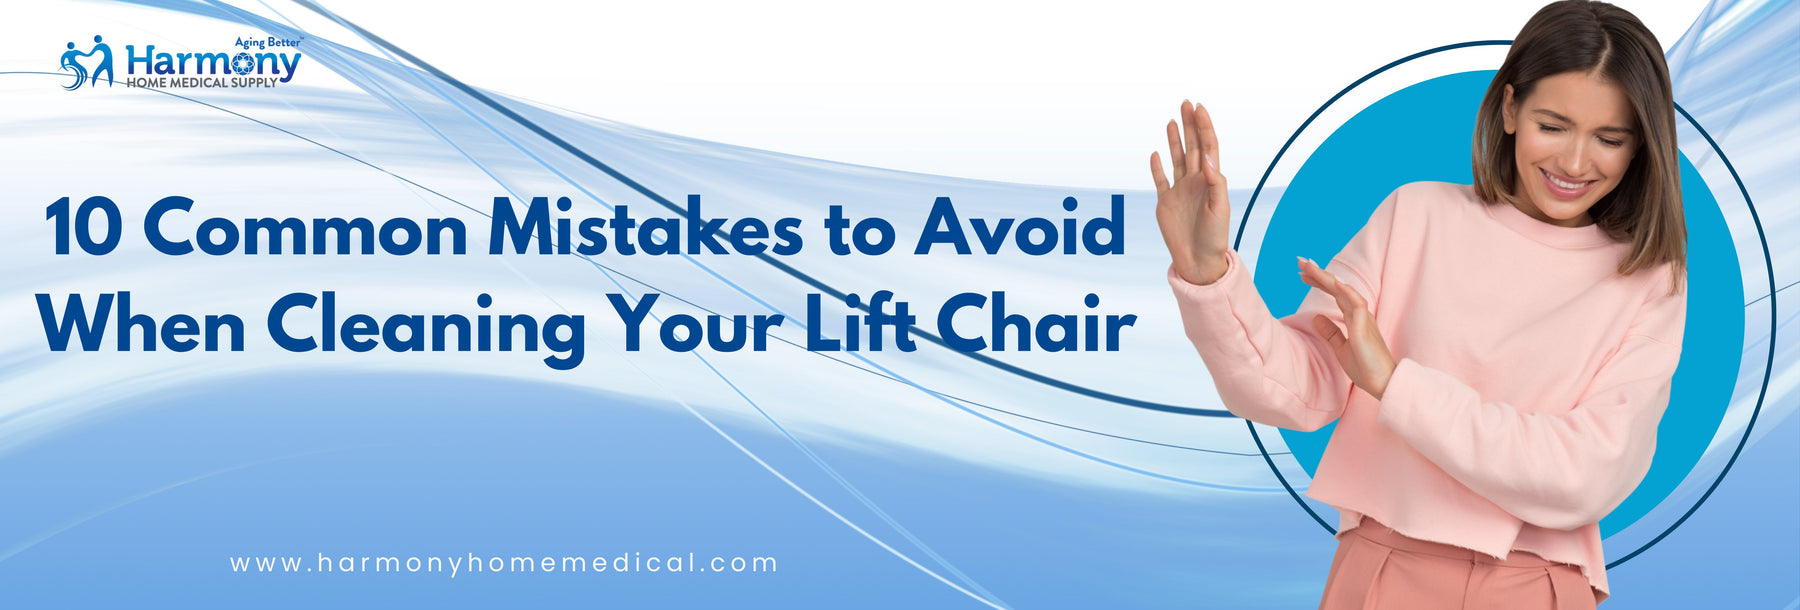 10 Common Mistakes to Avoid When Cleaning Your Lift Chair - Harmony Home Medical Supply